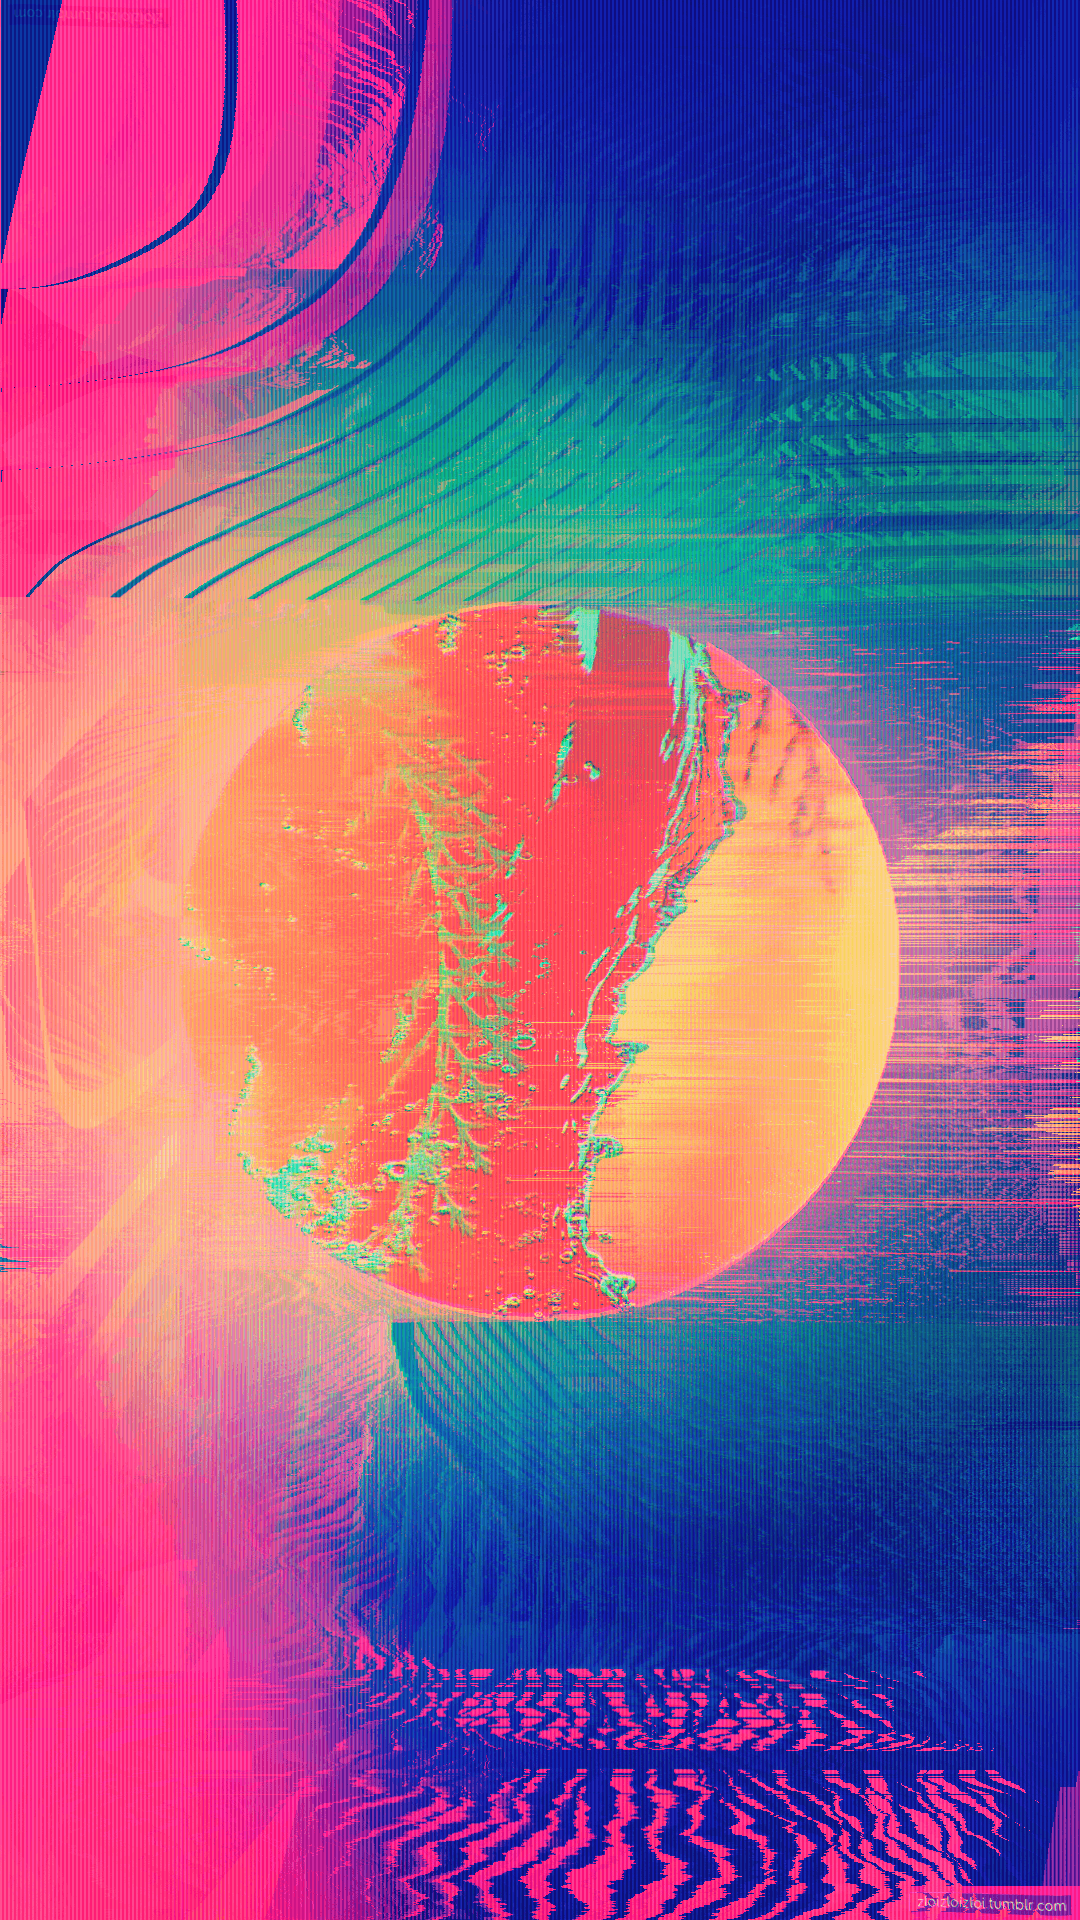 Glitchy Wallpaper (image in Collection)